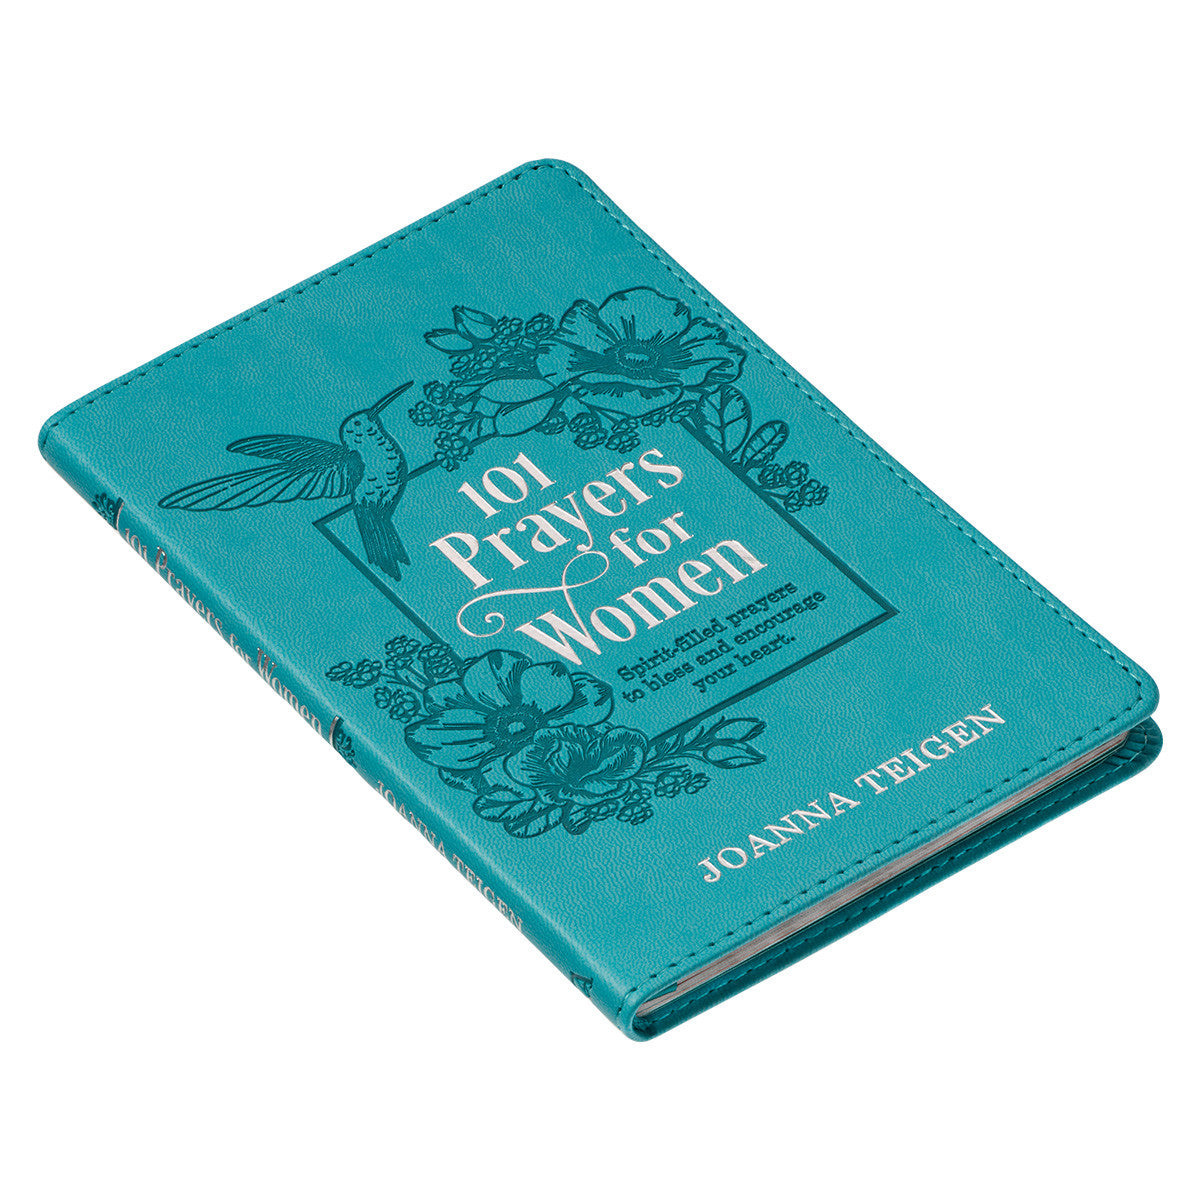 101 Prayers for Women Turquoise Faux Leather Gift Book - The Christian Gift Company